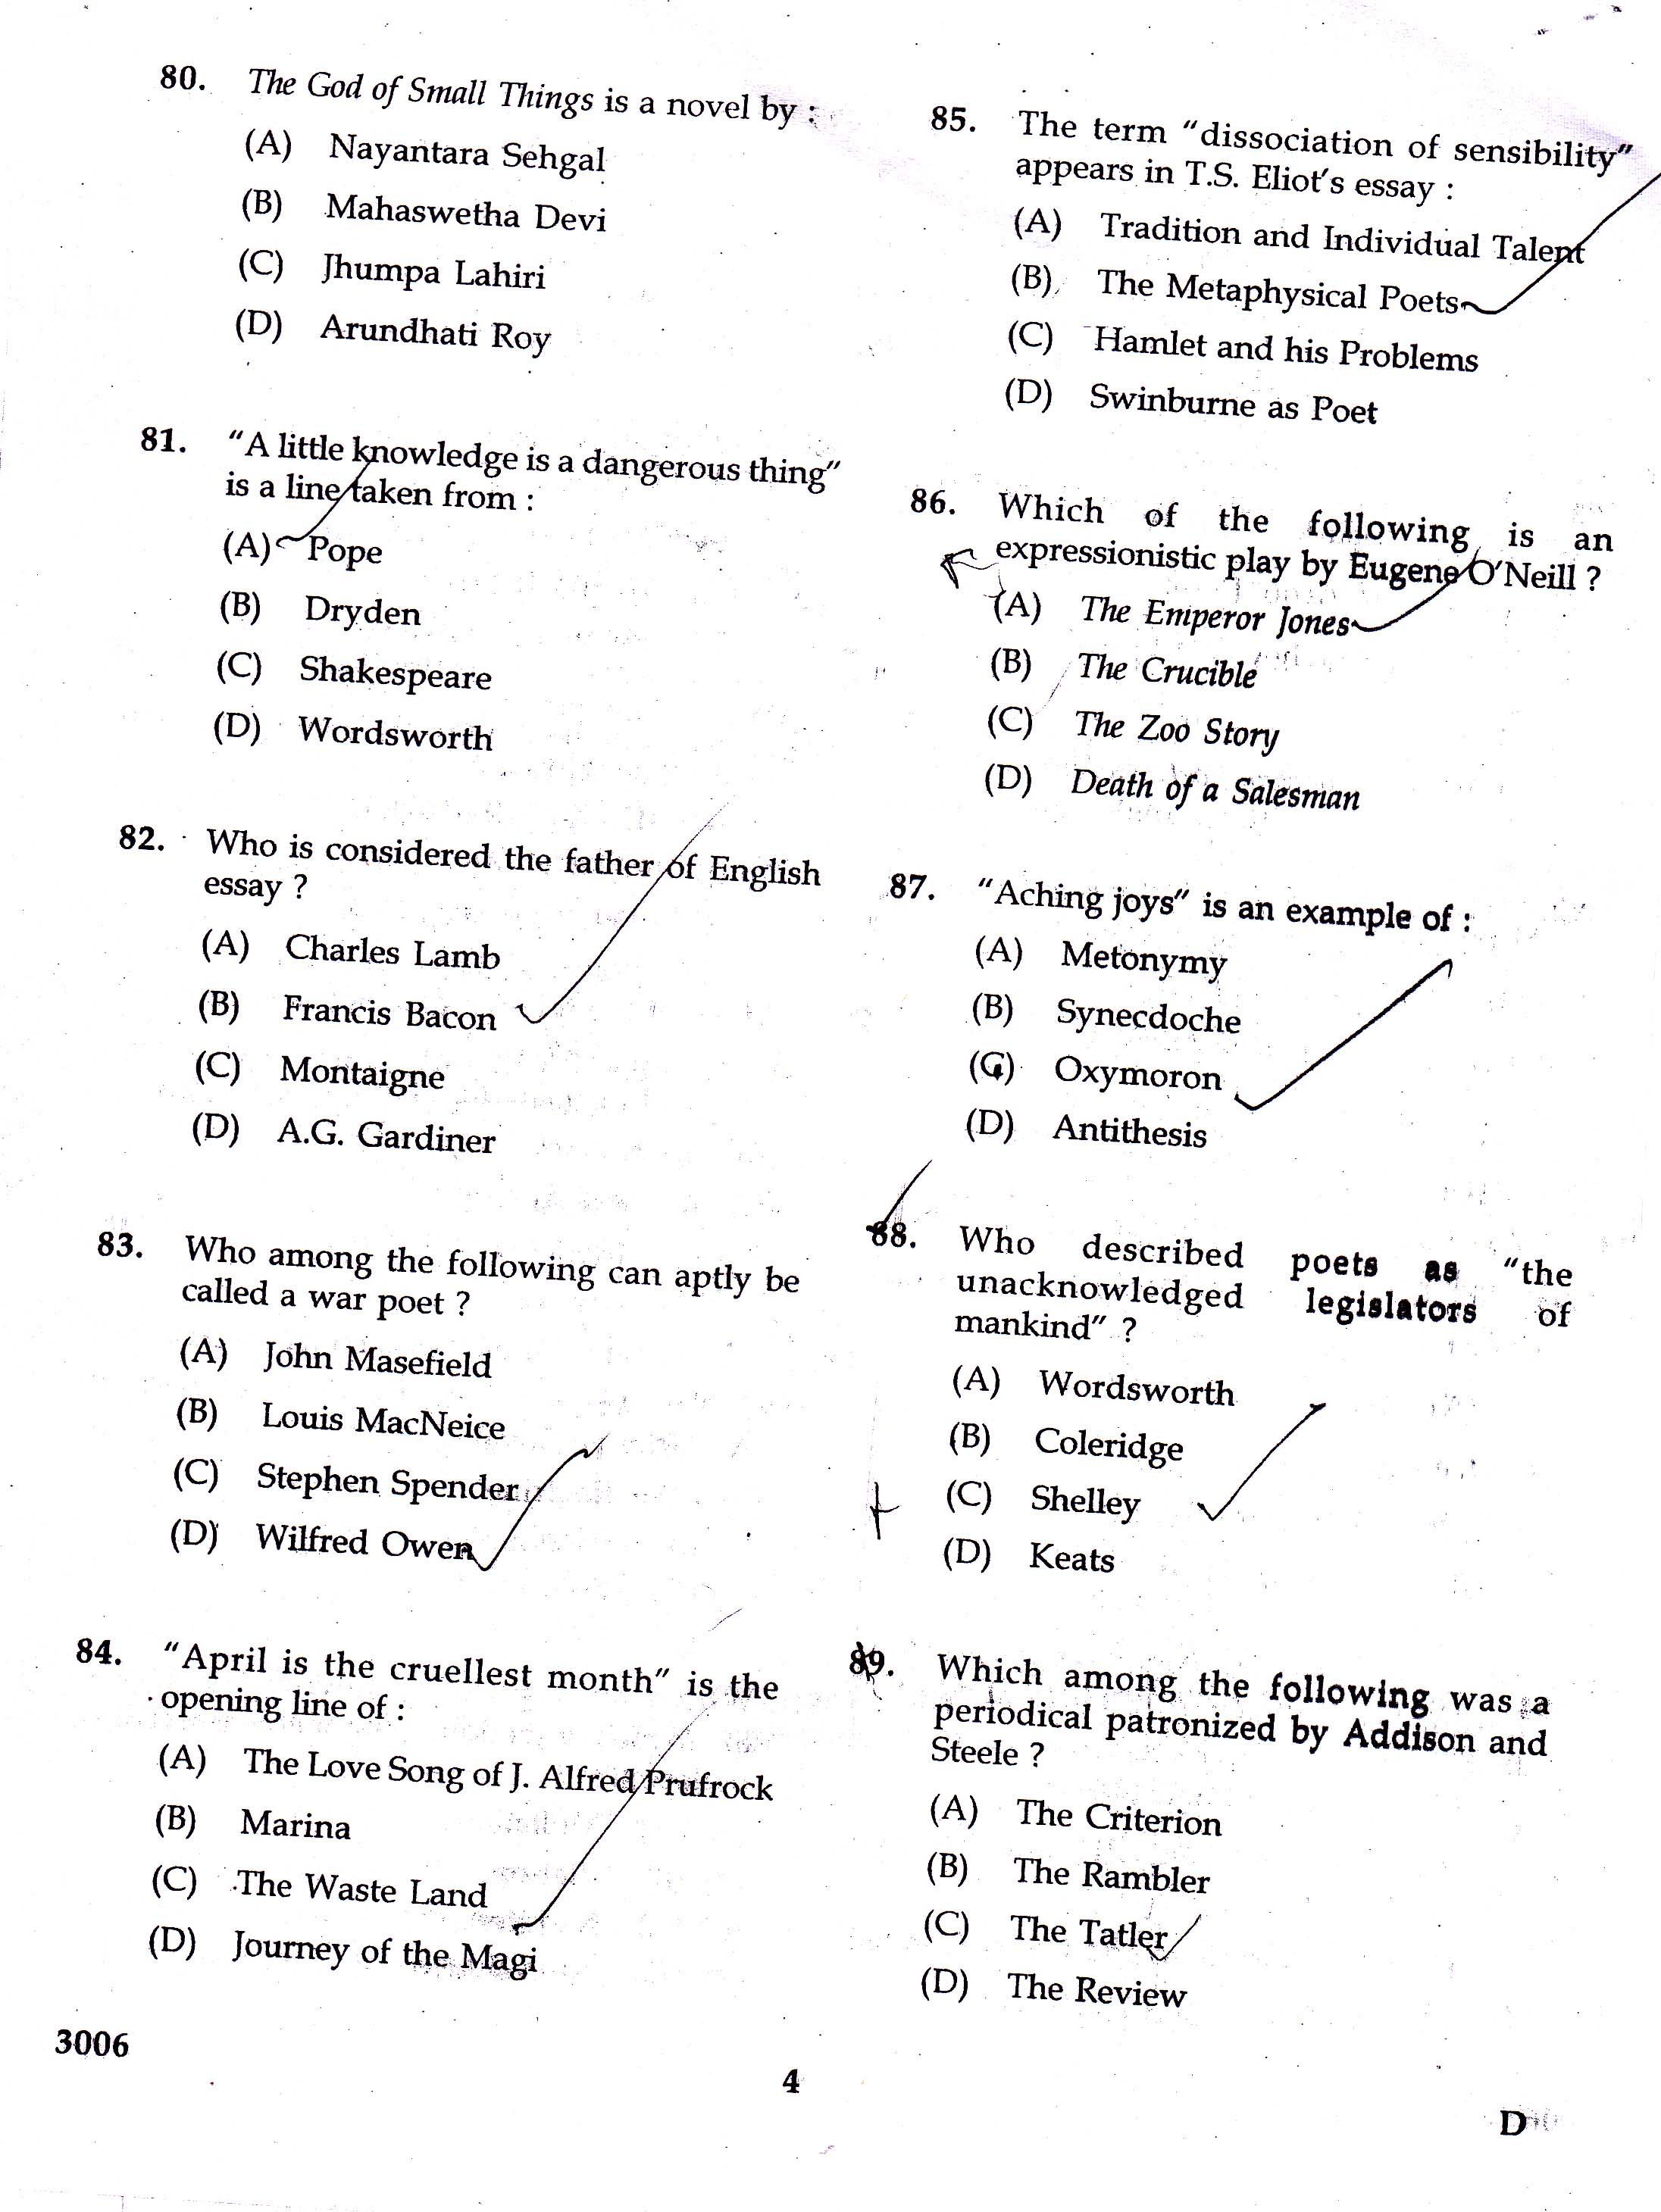 KTET Category III Part 3 English Question Paper with Answers 2017 2